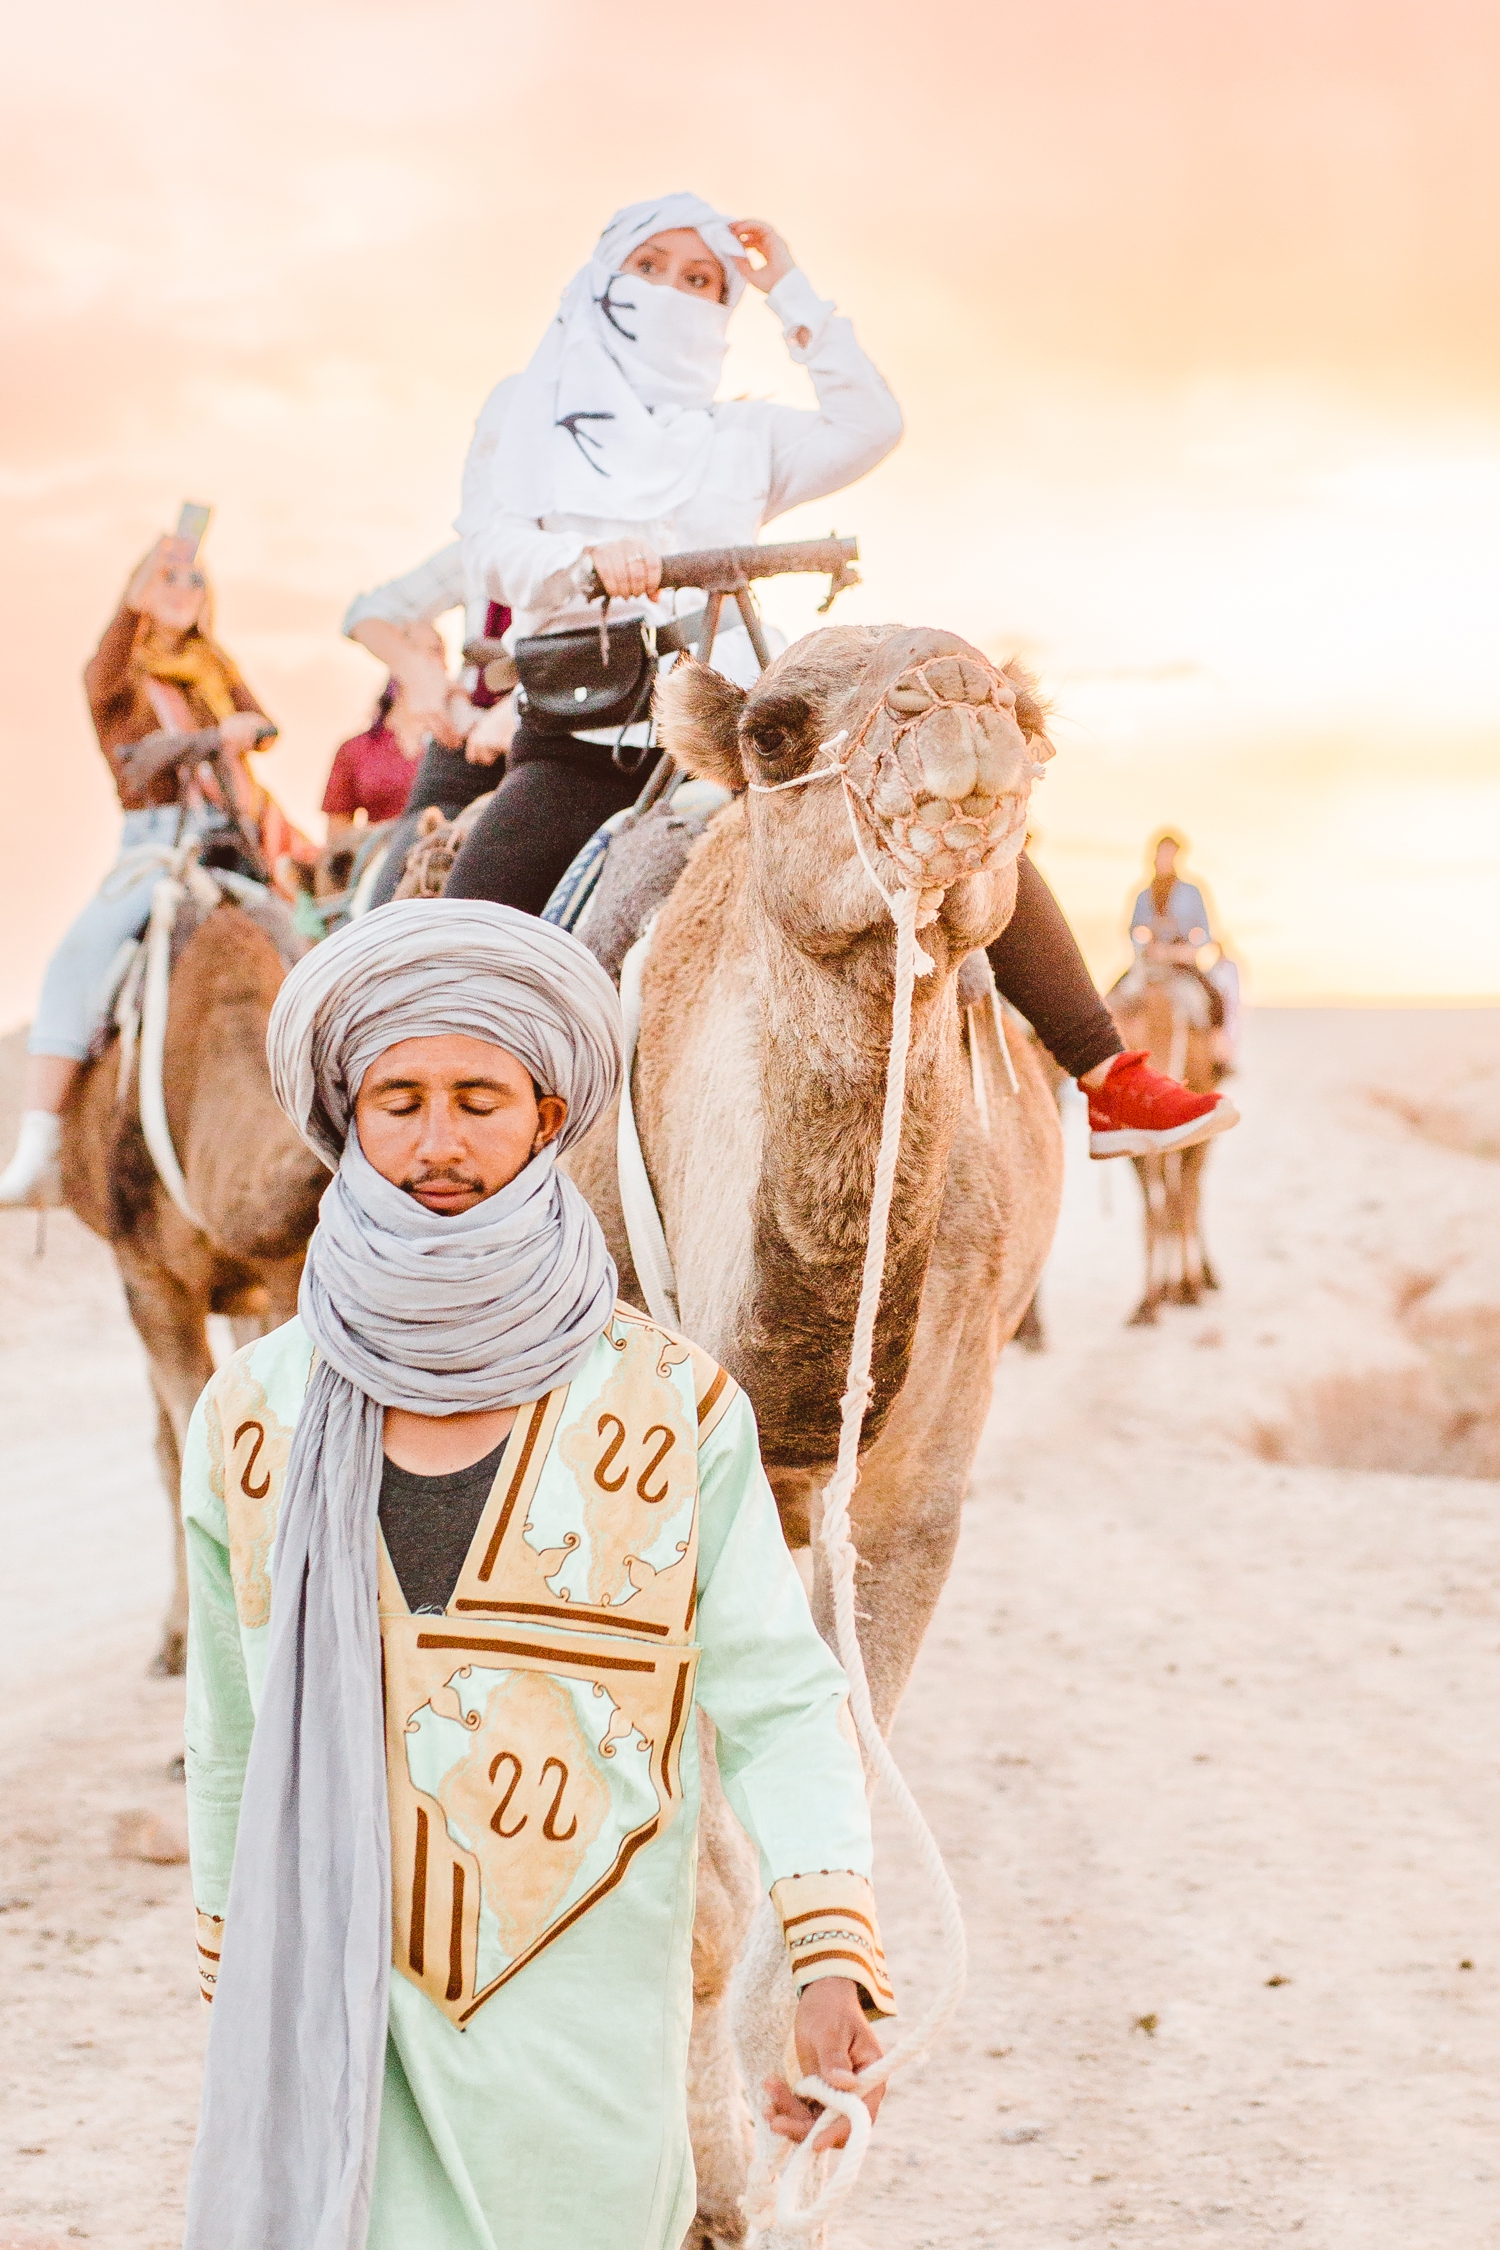 Man leading group of women riding camels in Afgay Desert in Morocco | Brooke Michelle Photography